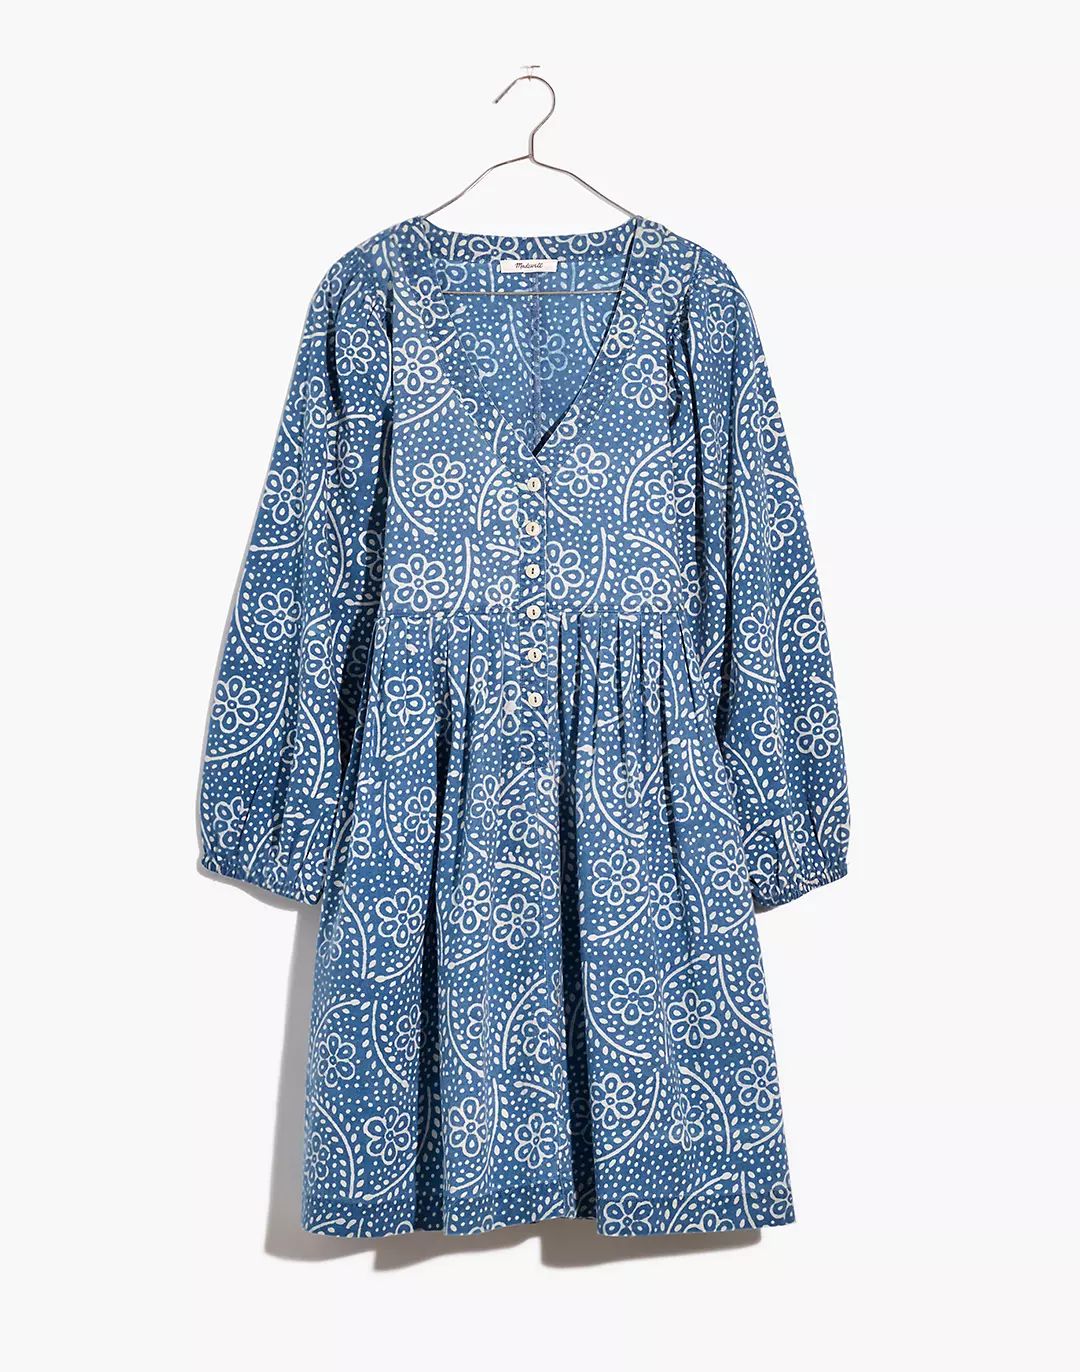 Bubble-Sleeve Button-Front Mini Dress in Indigo Paisley | Madewell